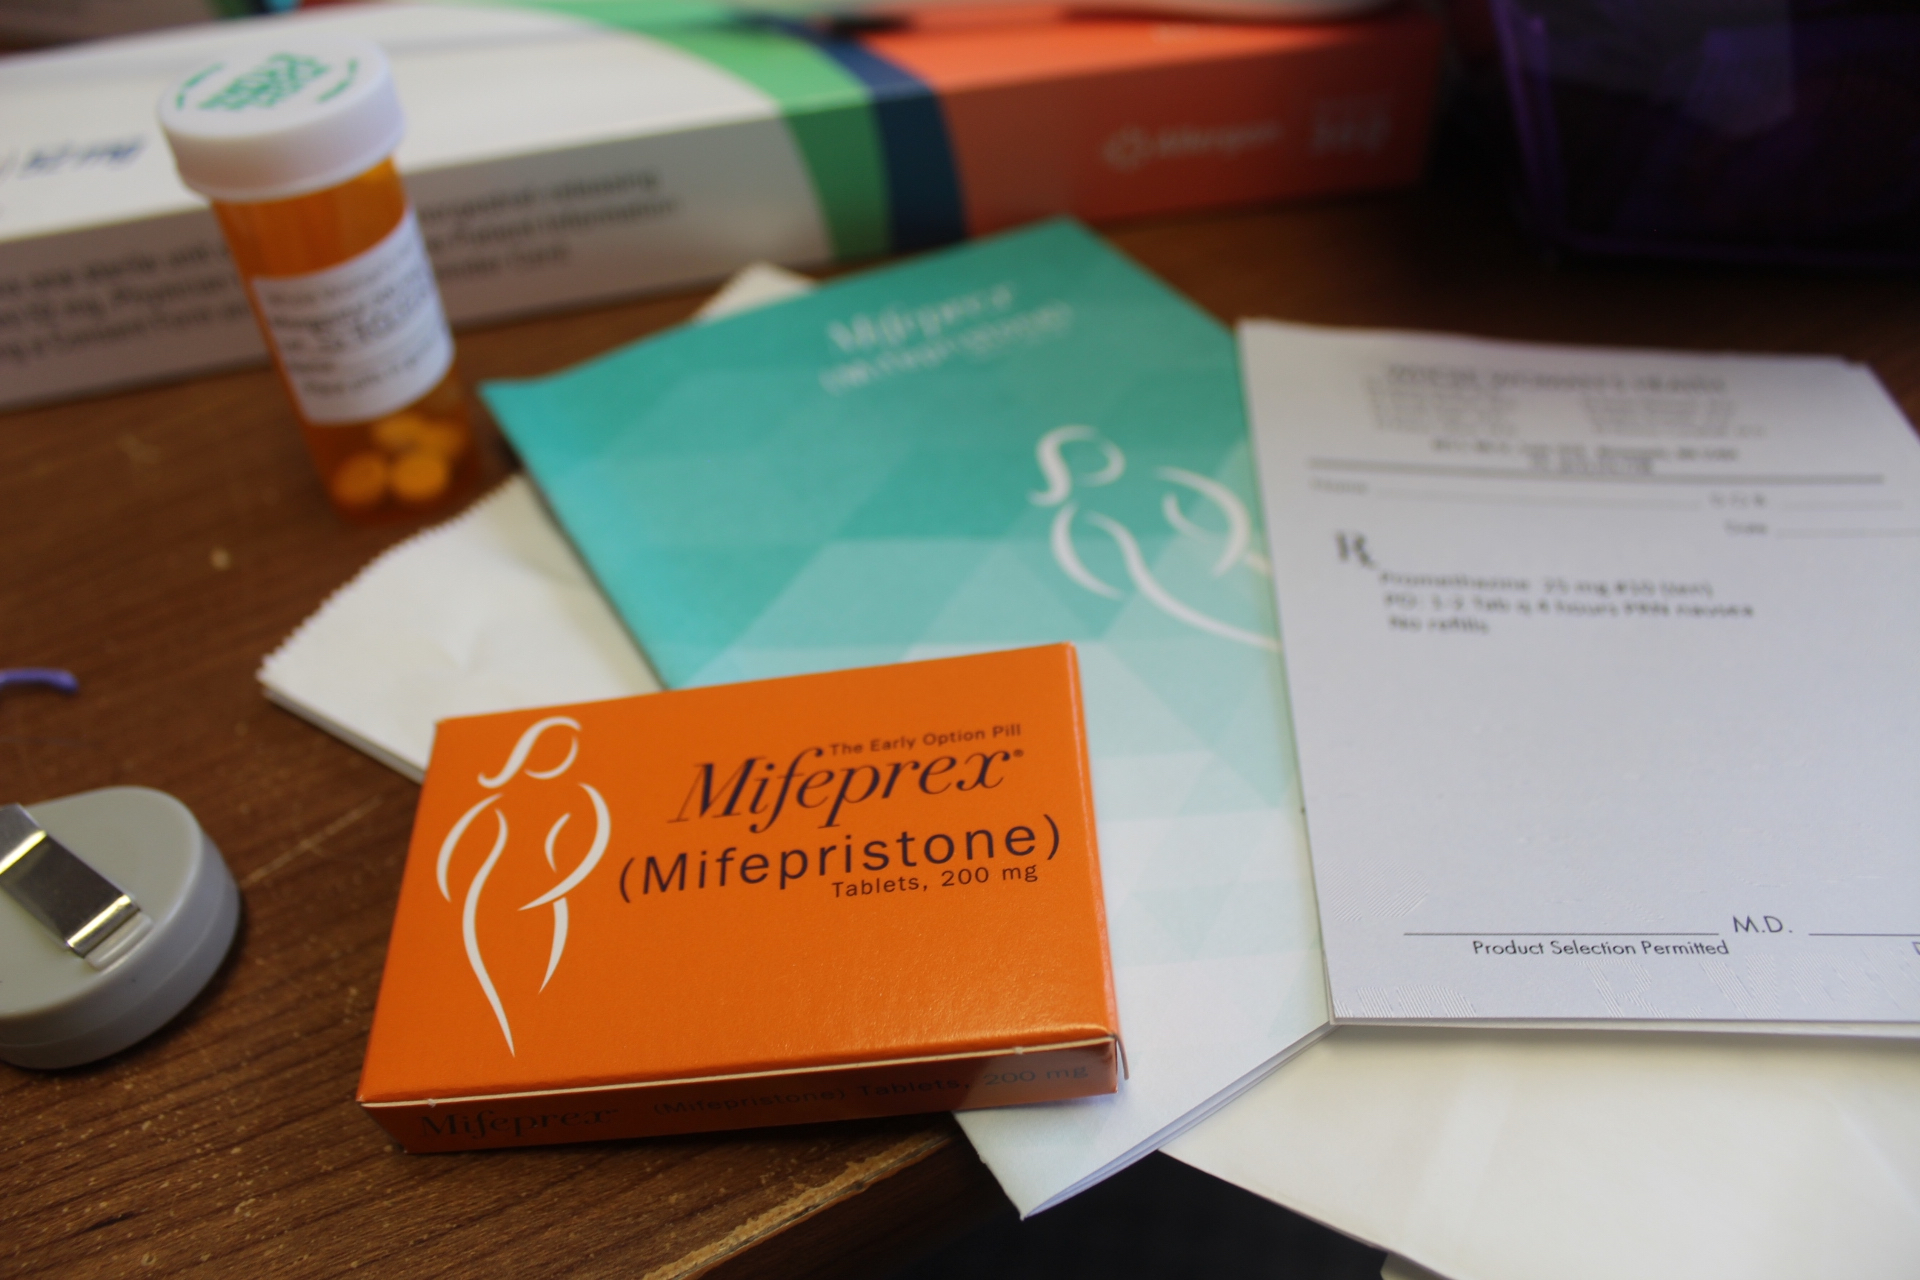 A table with medical pamphlets and a box of the abortion pill mifepristone